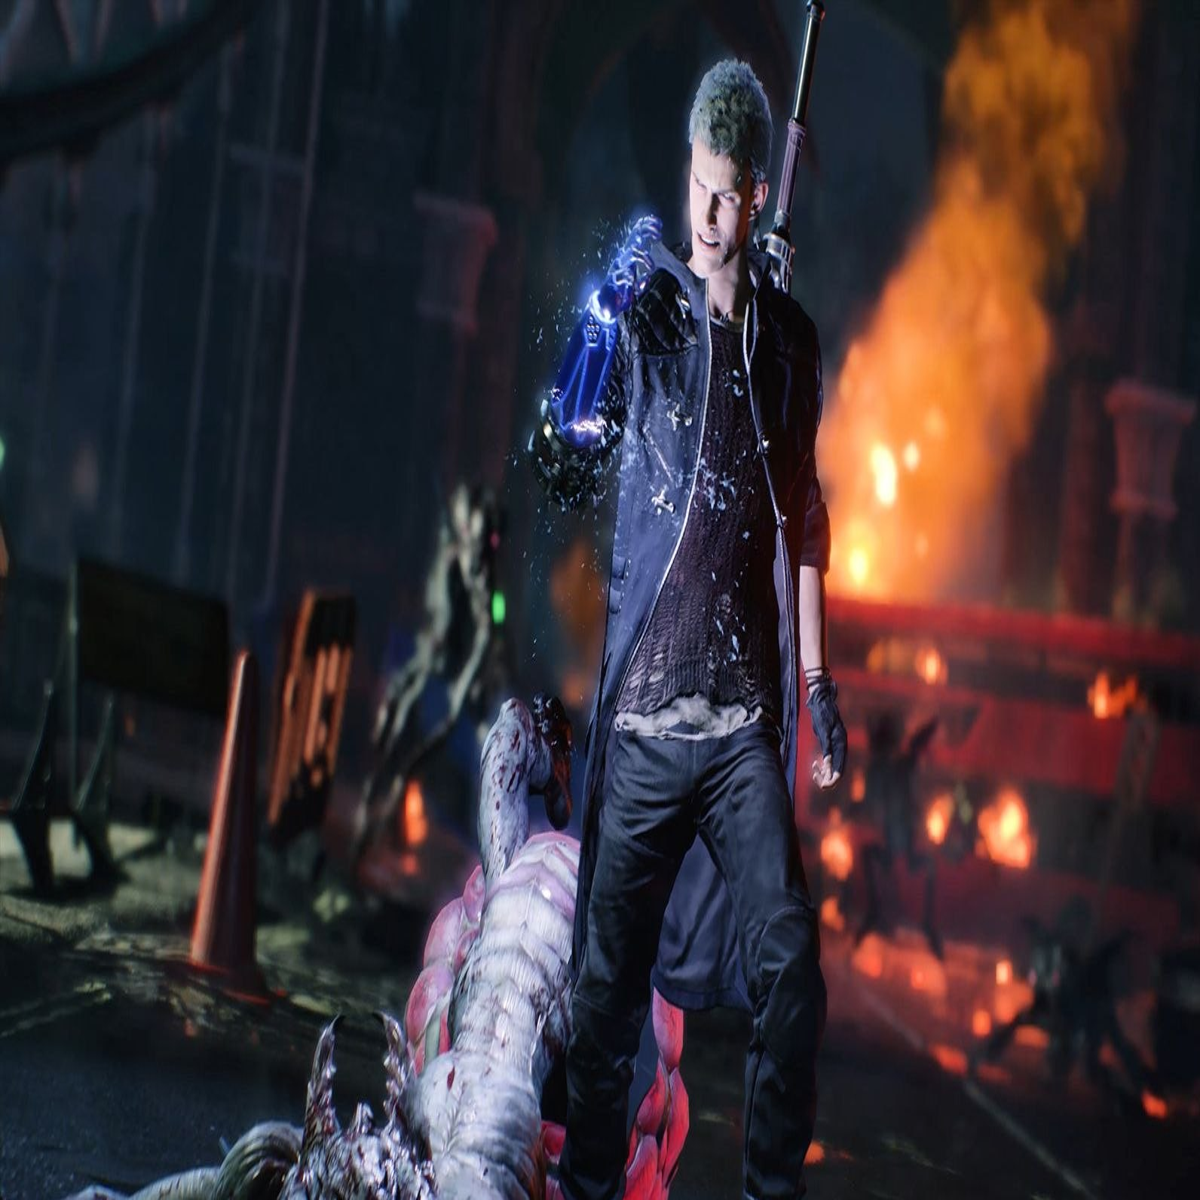 DMC5, Nero Gameplay Guide - Ability & Weapon Tips